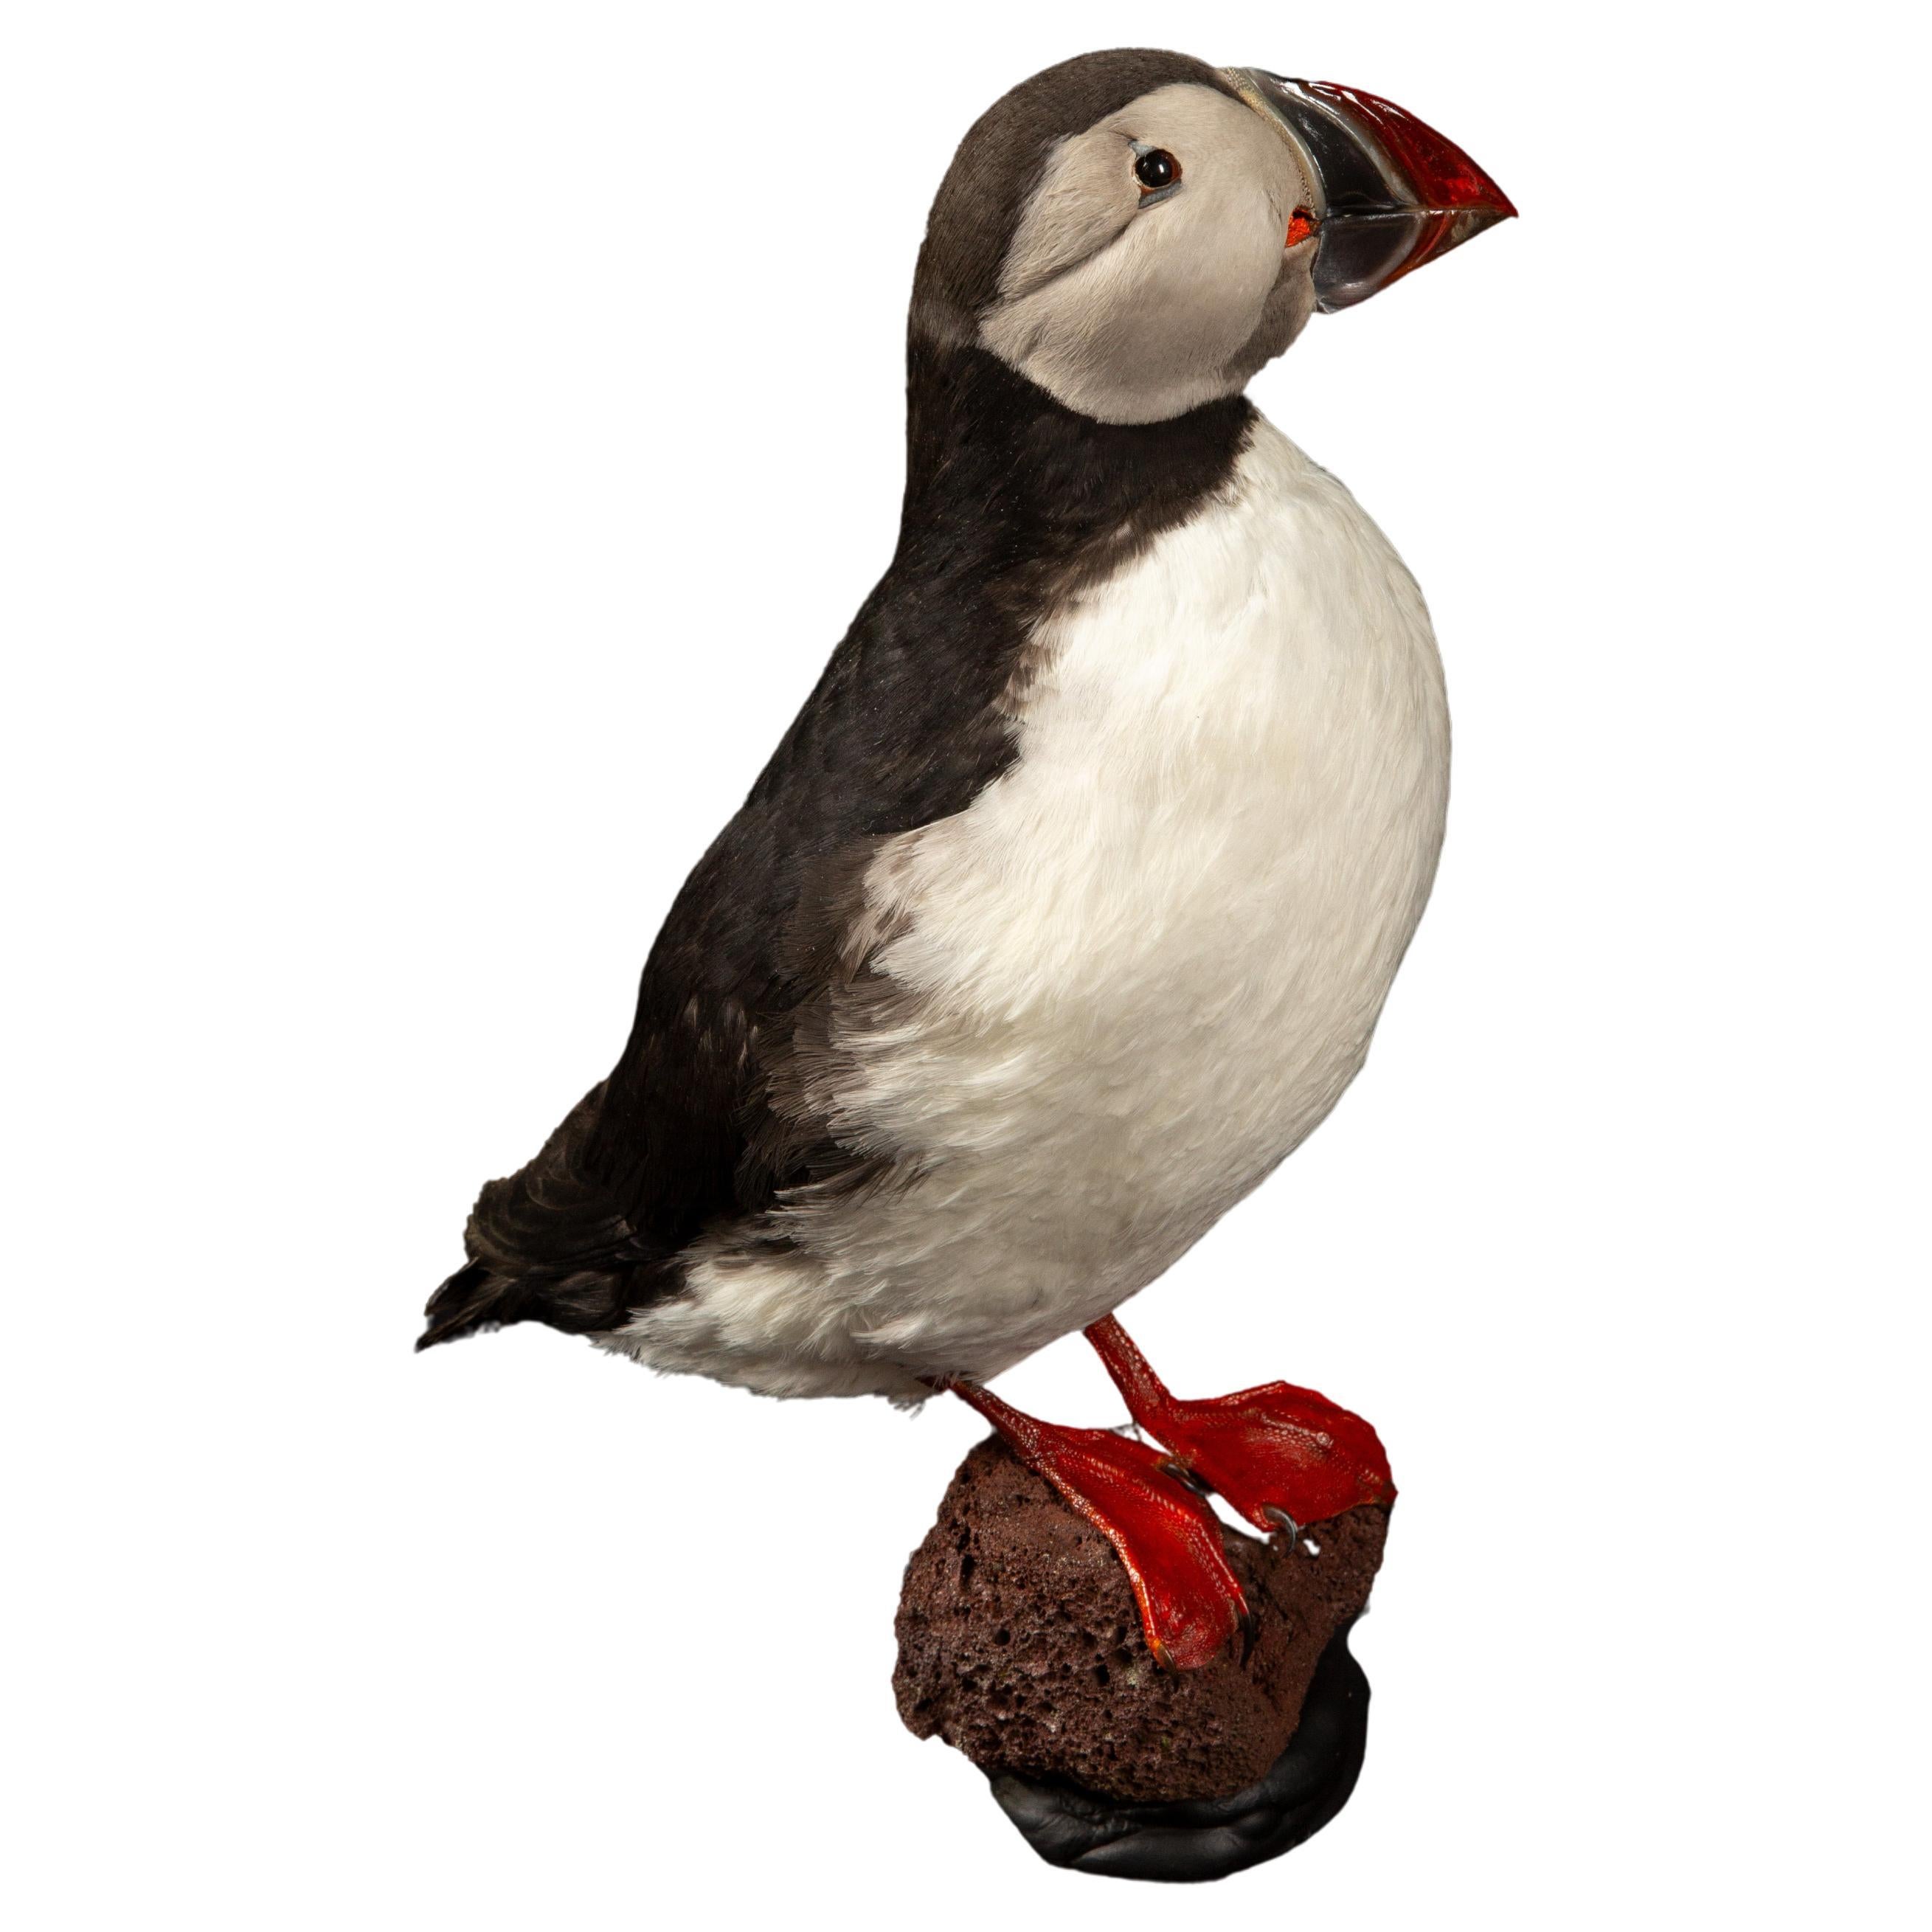 Celebrate Nature's Beauty: Taxidermie Atlantic Puffin Bird